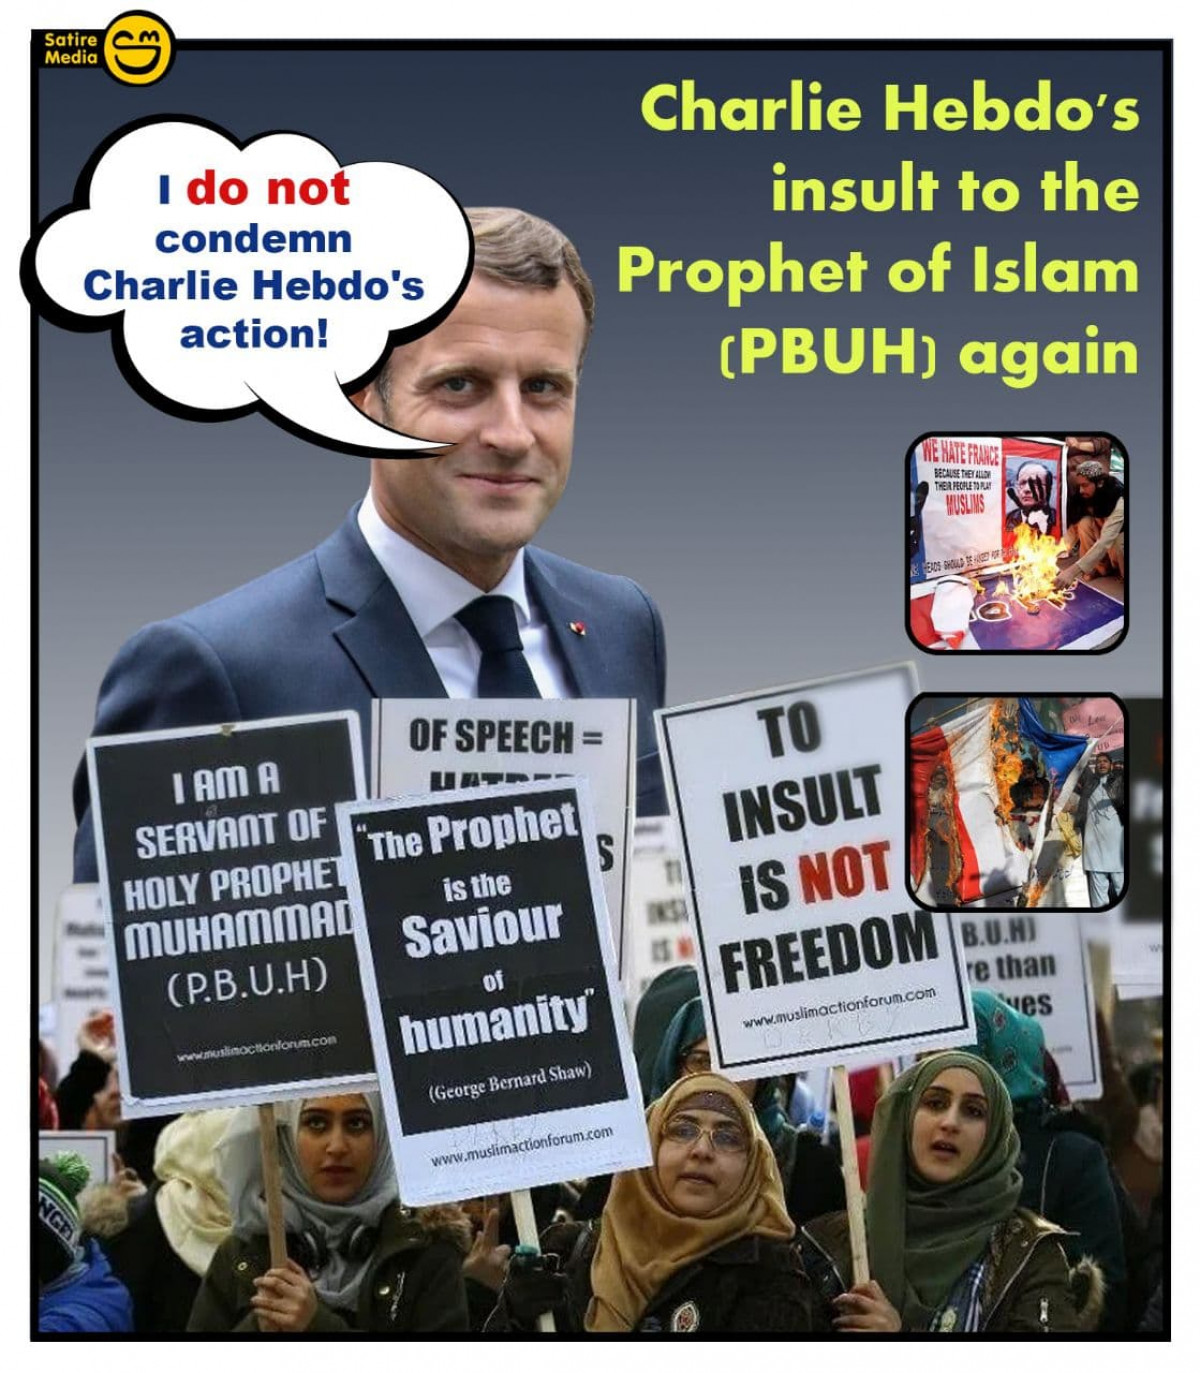 Charlie Hebdo's insult to the Prophet of Islam (PBUH) again